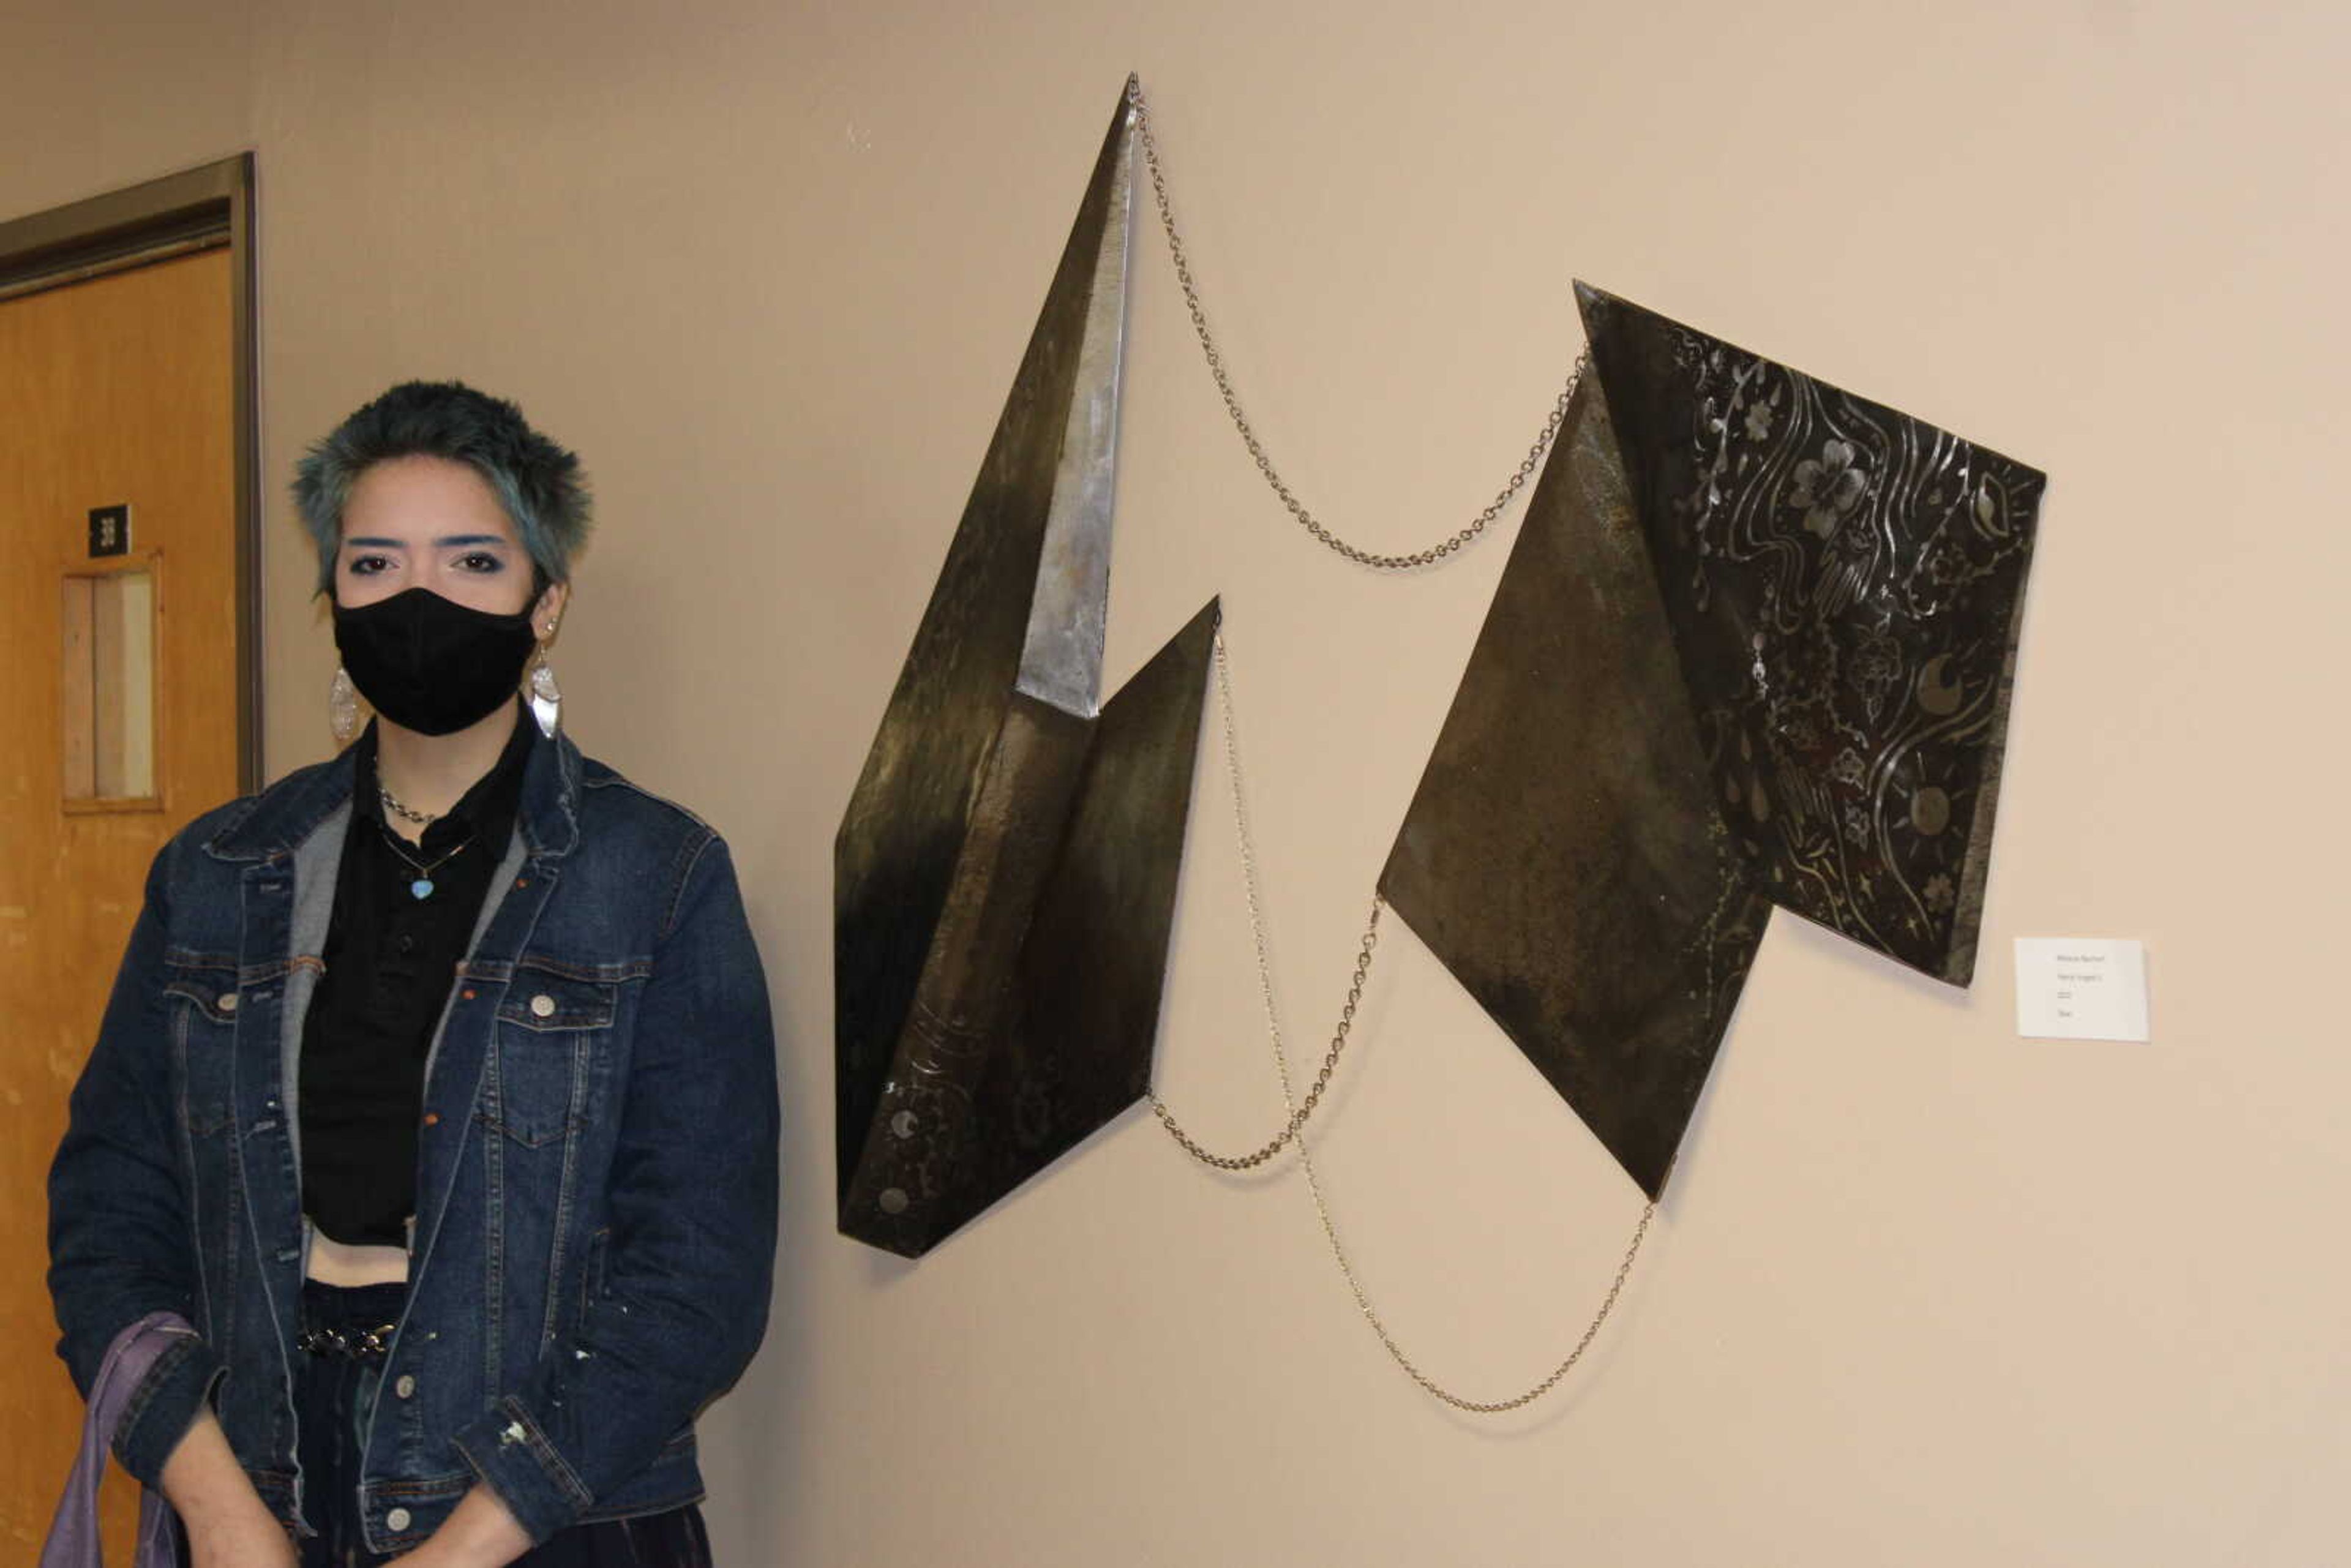 Sculpture senior Melanie Reichert won best in show at the Brandt student art exhibition on April 18. The piece titled, "Faerie Forged II" included a set of angular steel objects hanging on the wall like a painting, connected by chains.